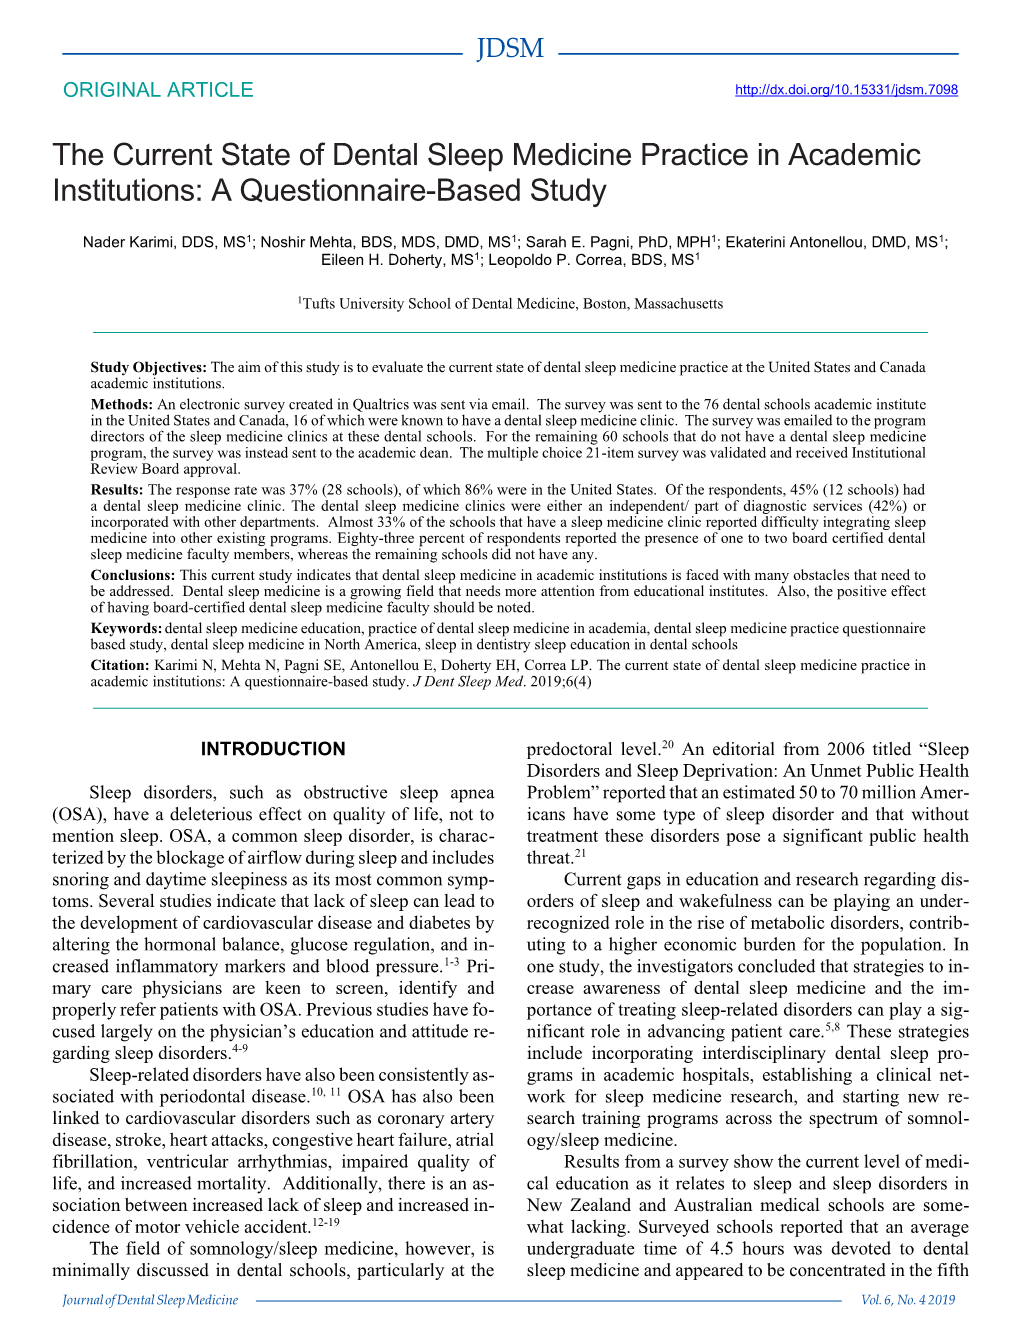 The Current State of Dental Sleep Medicine Practice in Academic Institutions: a Questionnaire-Based Study